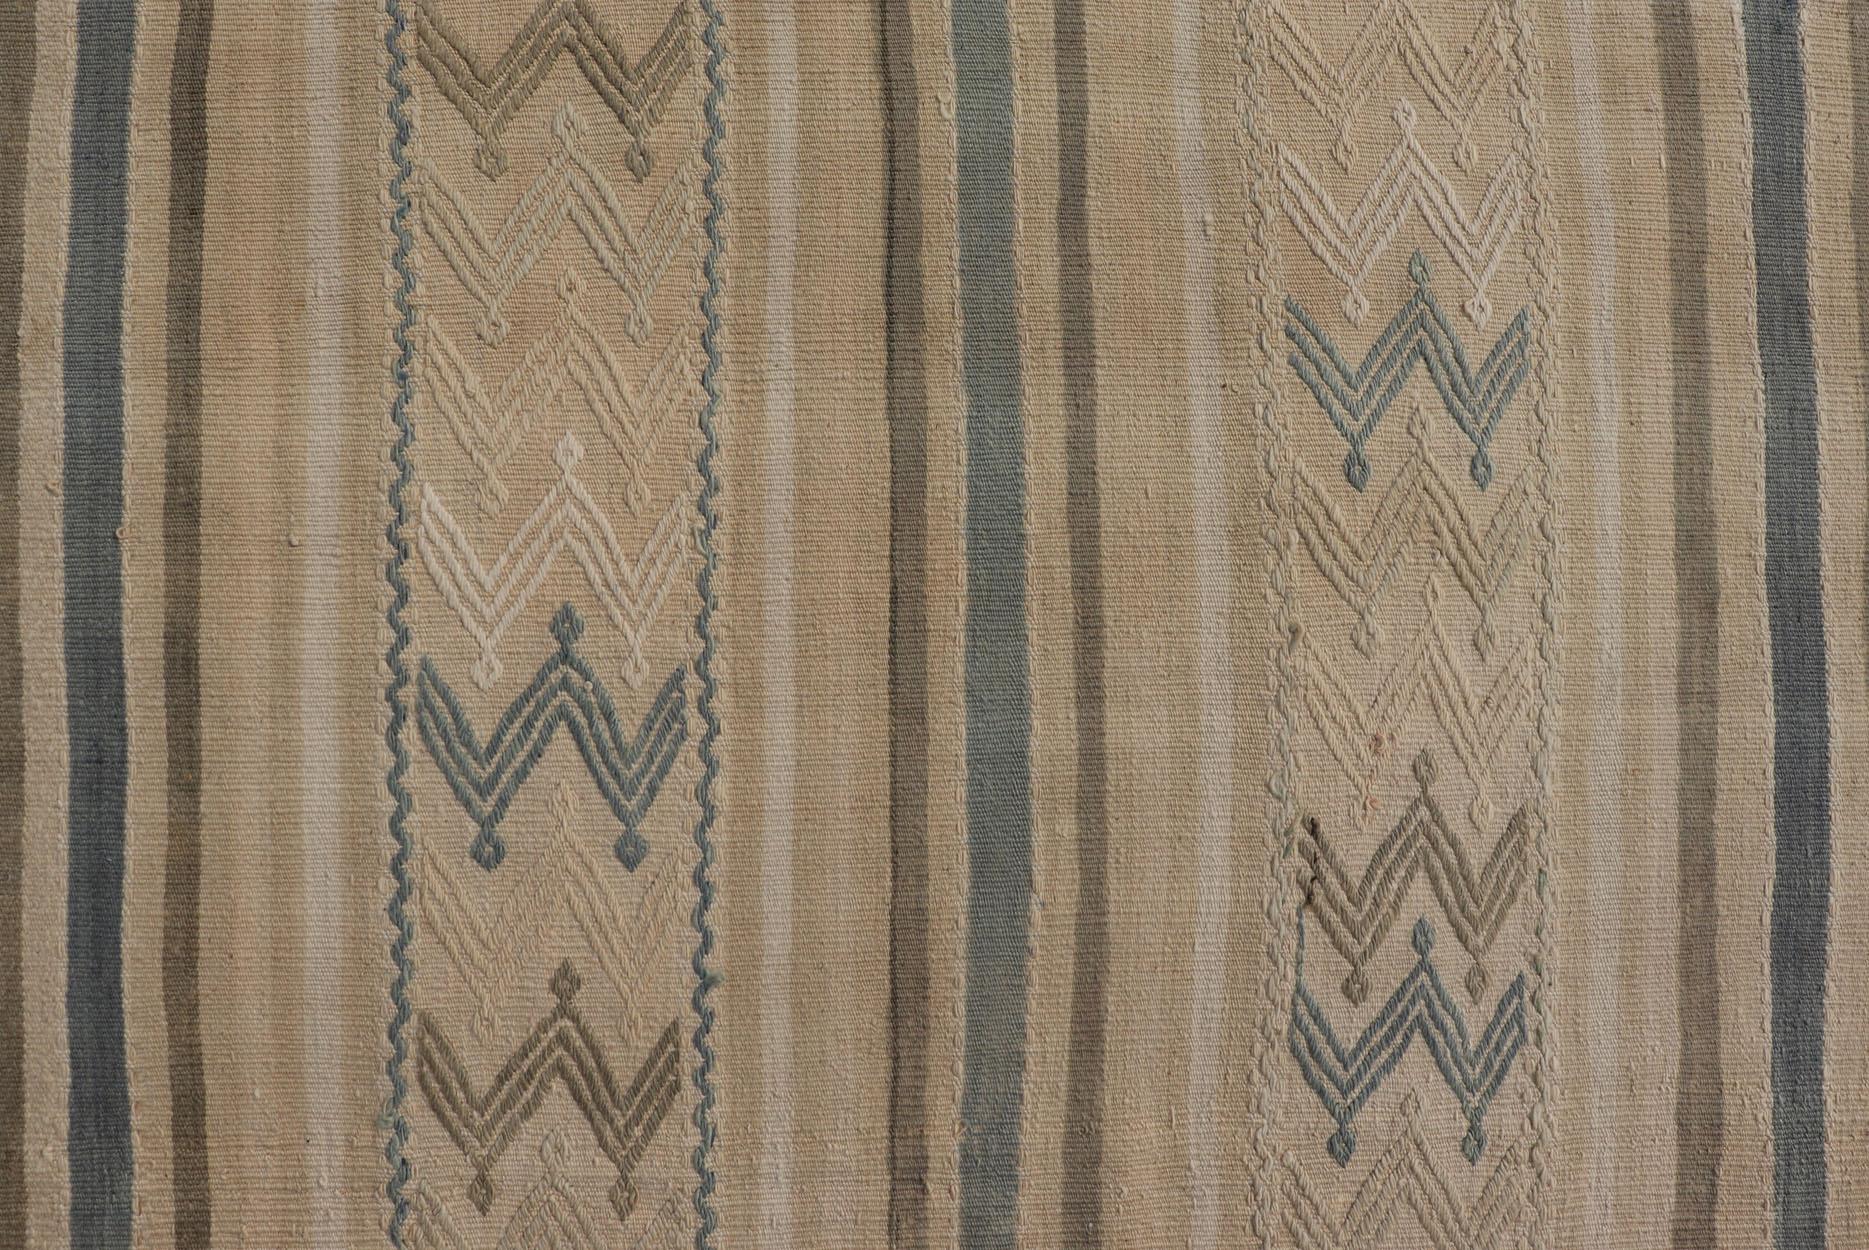 20th Century Vintage Turkish Flat-Weave with Embroideries in Earth Tones and Blue For Sale